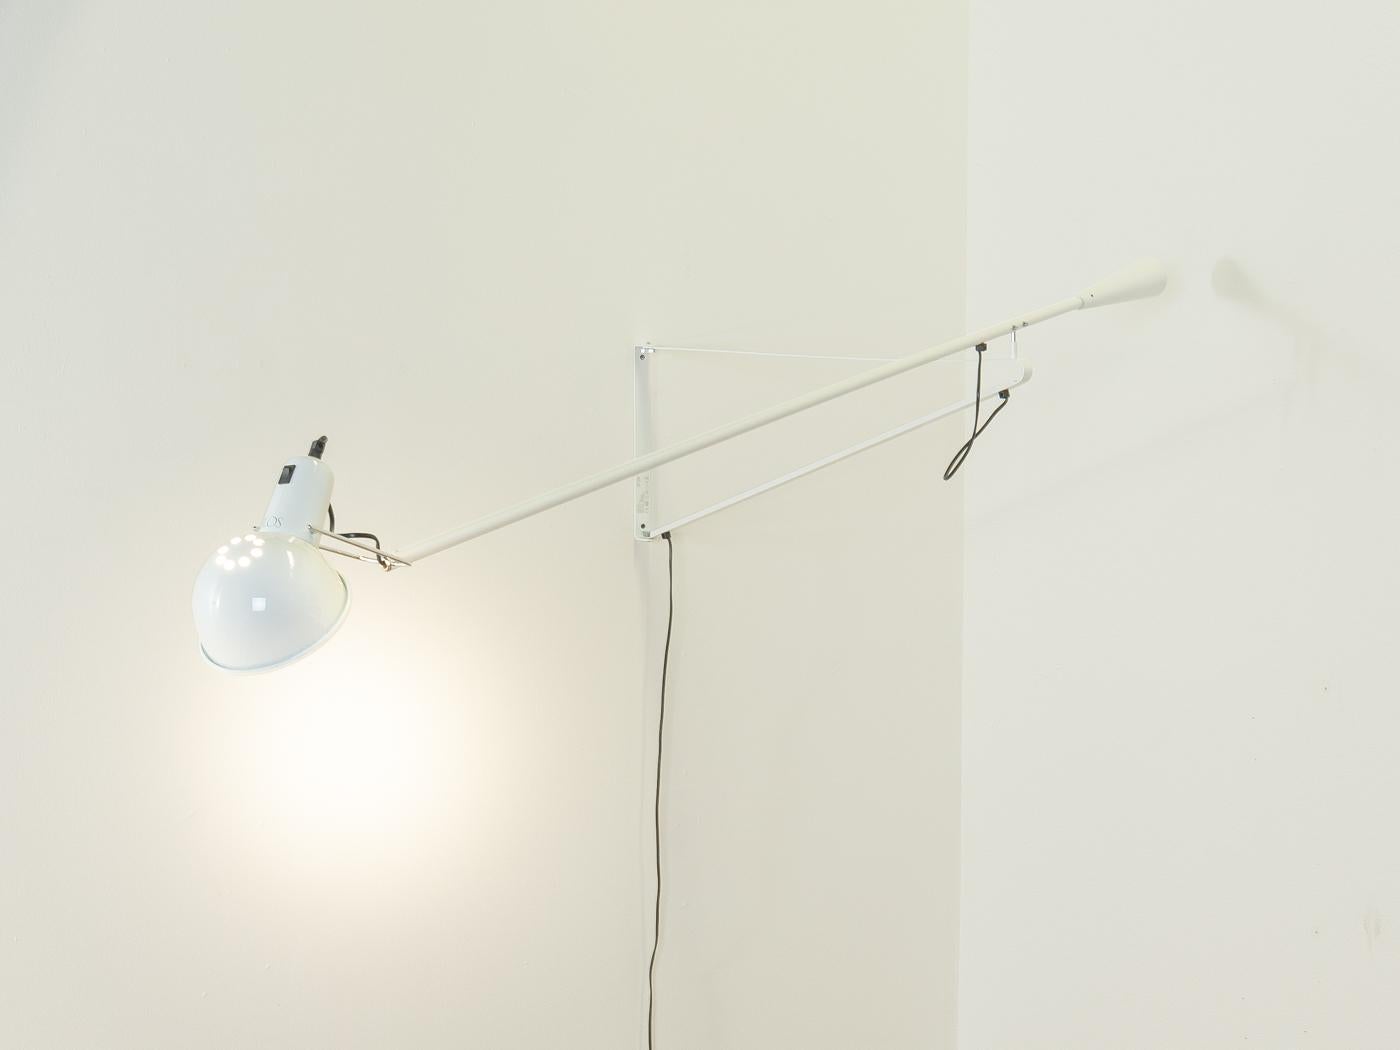 
Article Details
265 wall lamp by Paolo Rizzatto for Flos. Draft from 1973. Reflector and adjustable arm in liquid-painted steel, chrome-plated brass reflector bracket, cast iron conical counterweight and wall mounting in liquid-painted